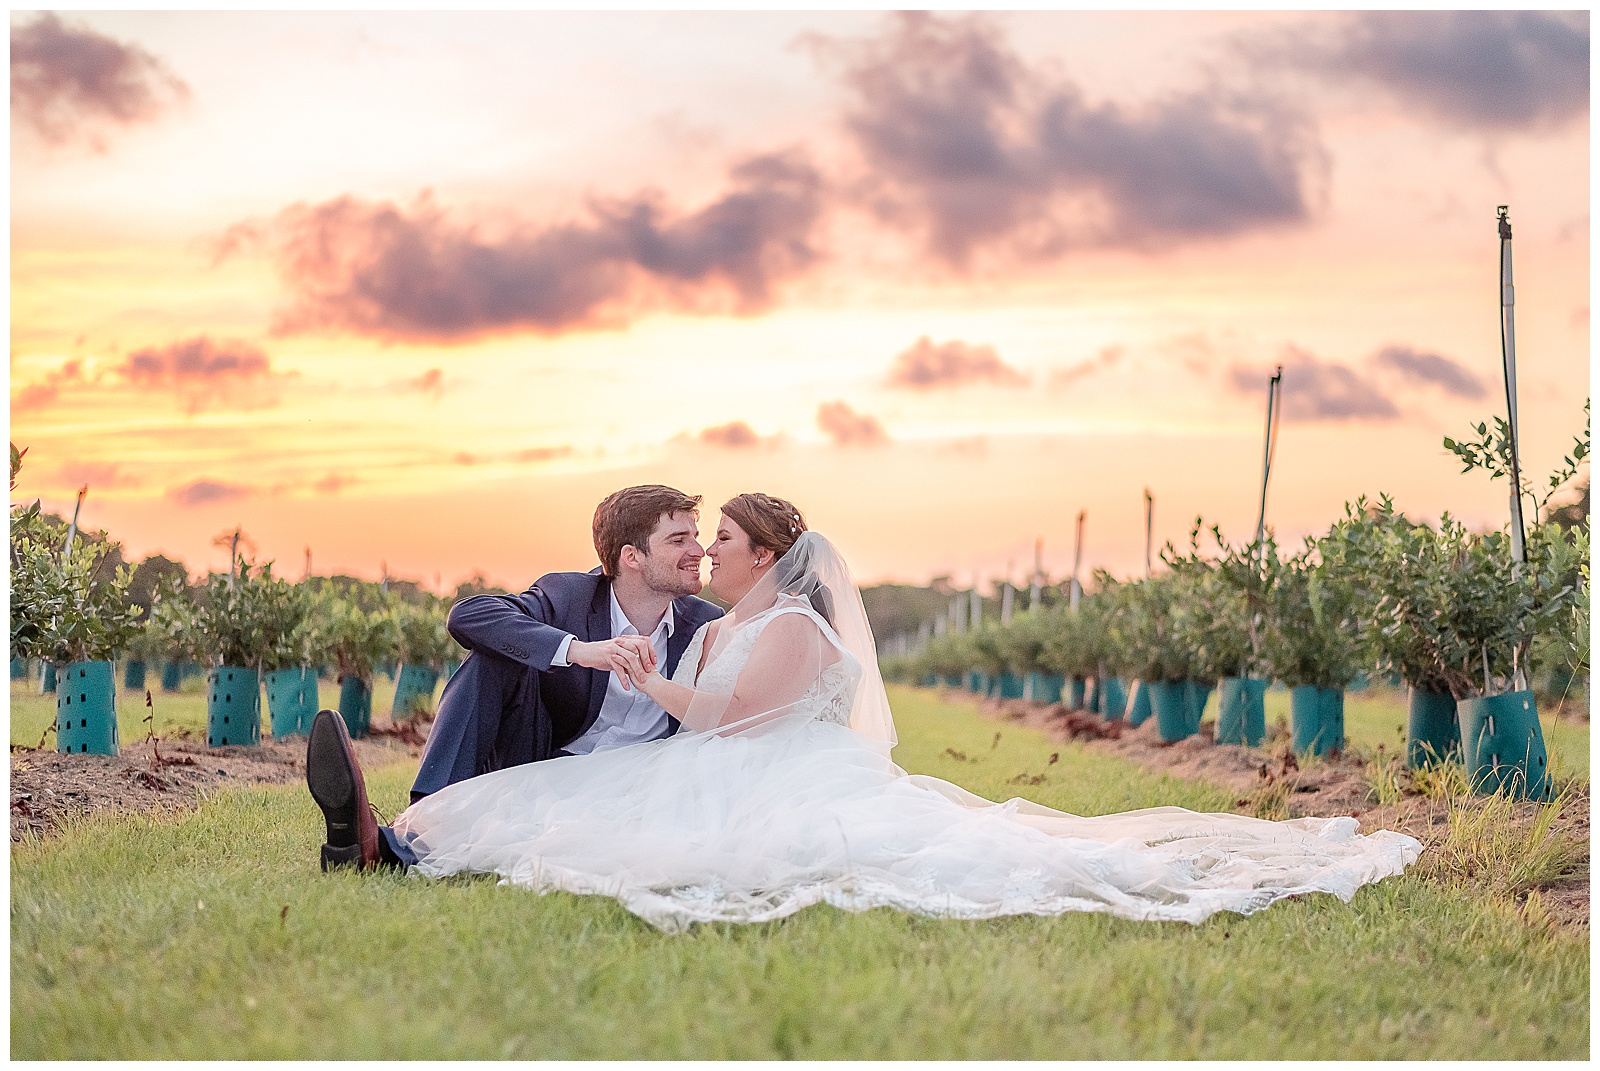 Bride and Groom sitting in the blueberry field during sunset photos at a Wedding at Ever After Farms Blueberry Barn 